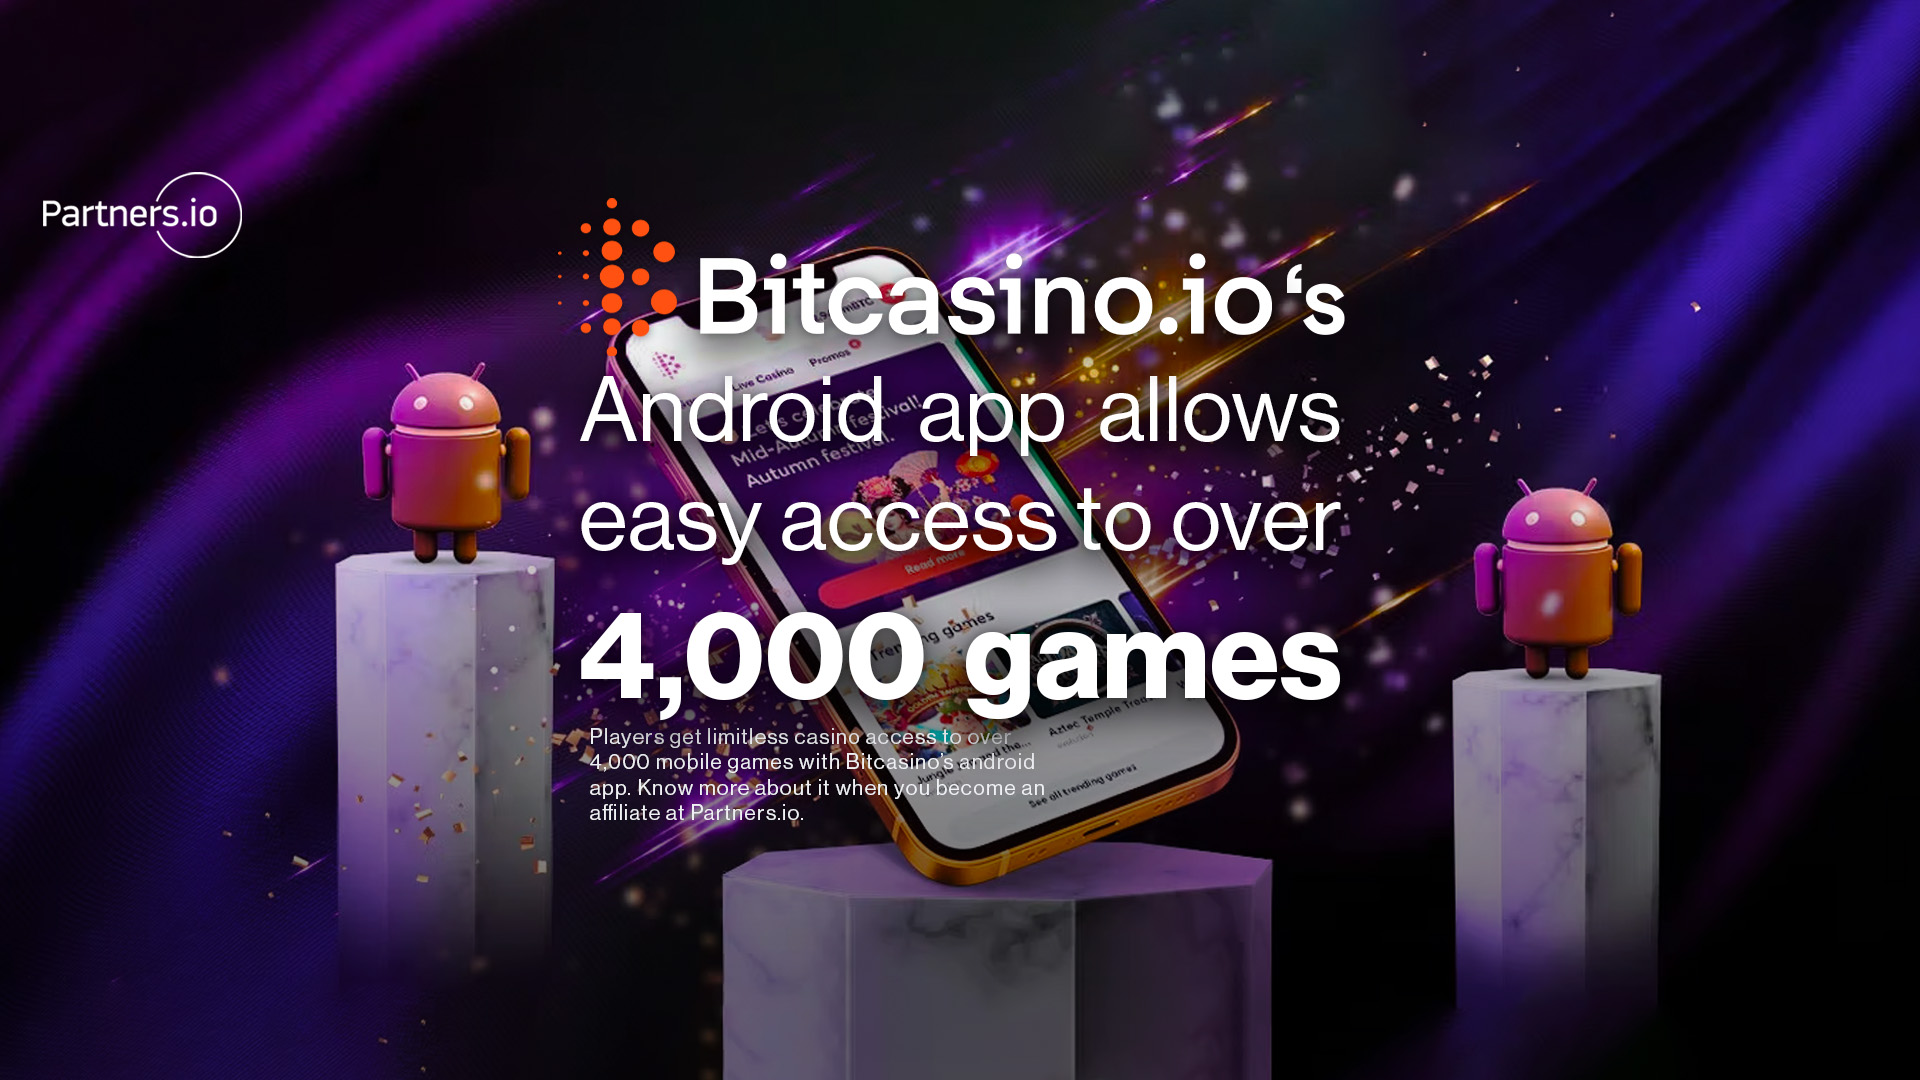 Bitcasino’s Android app allows easy access to over 4,000 games